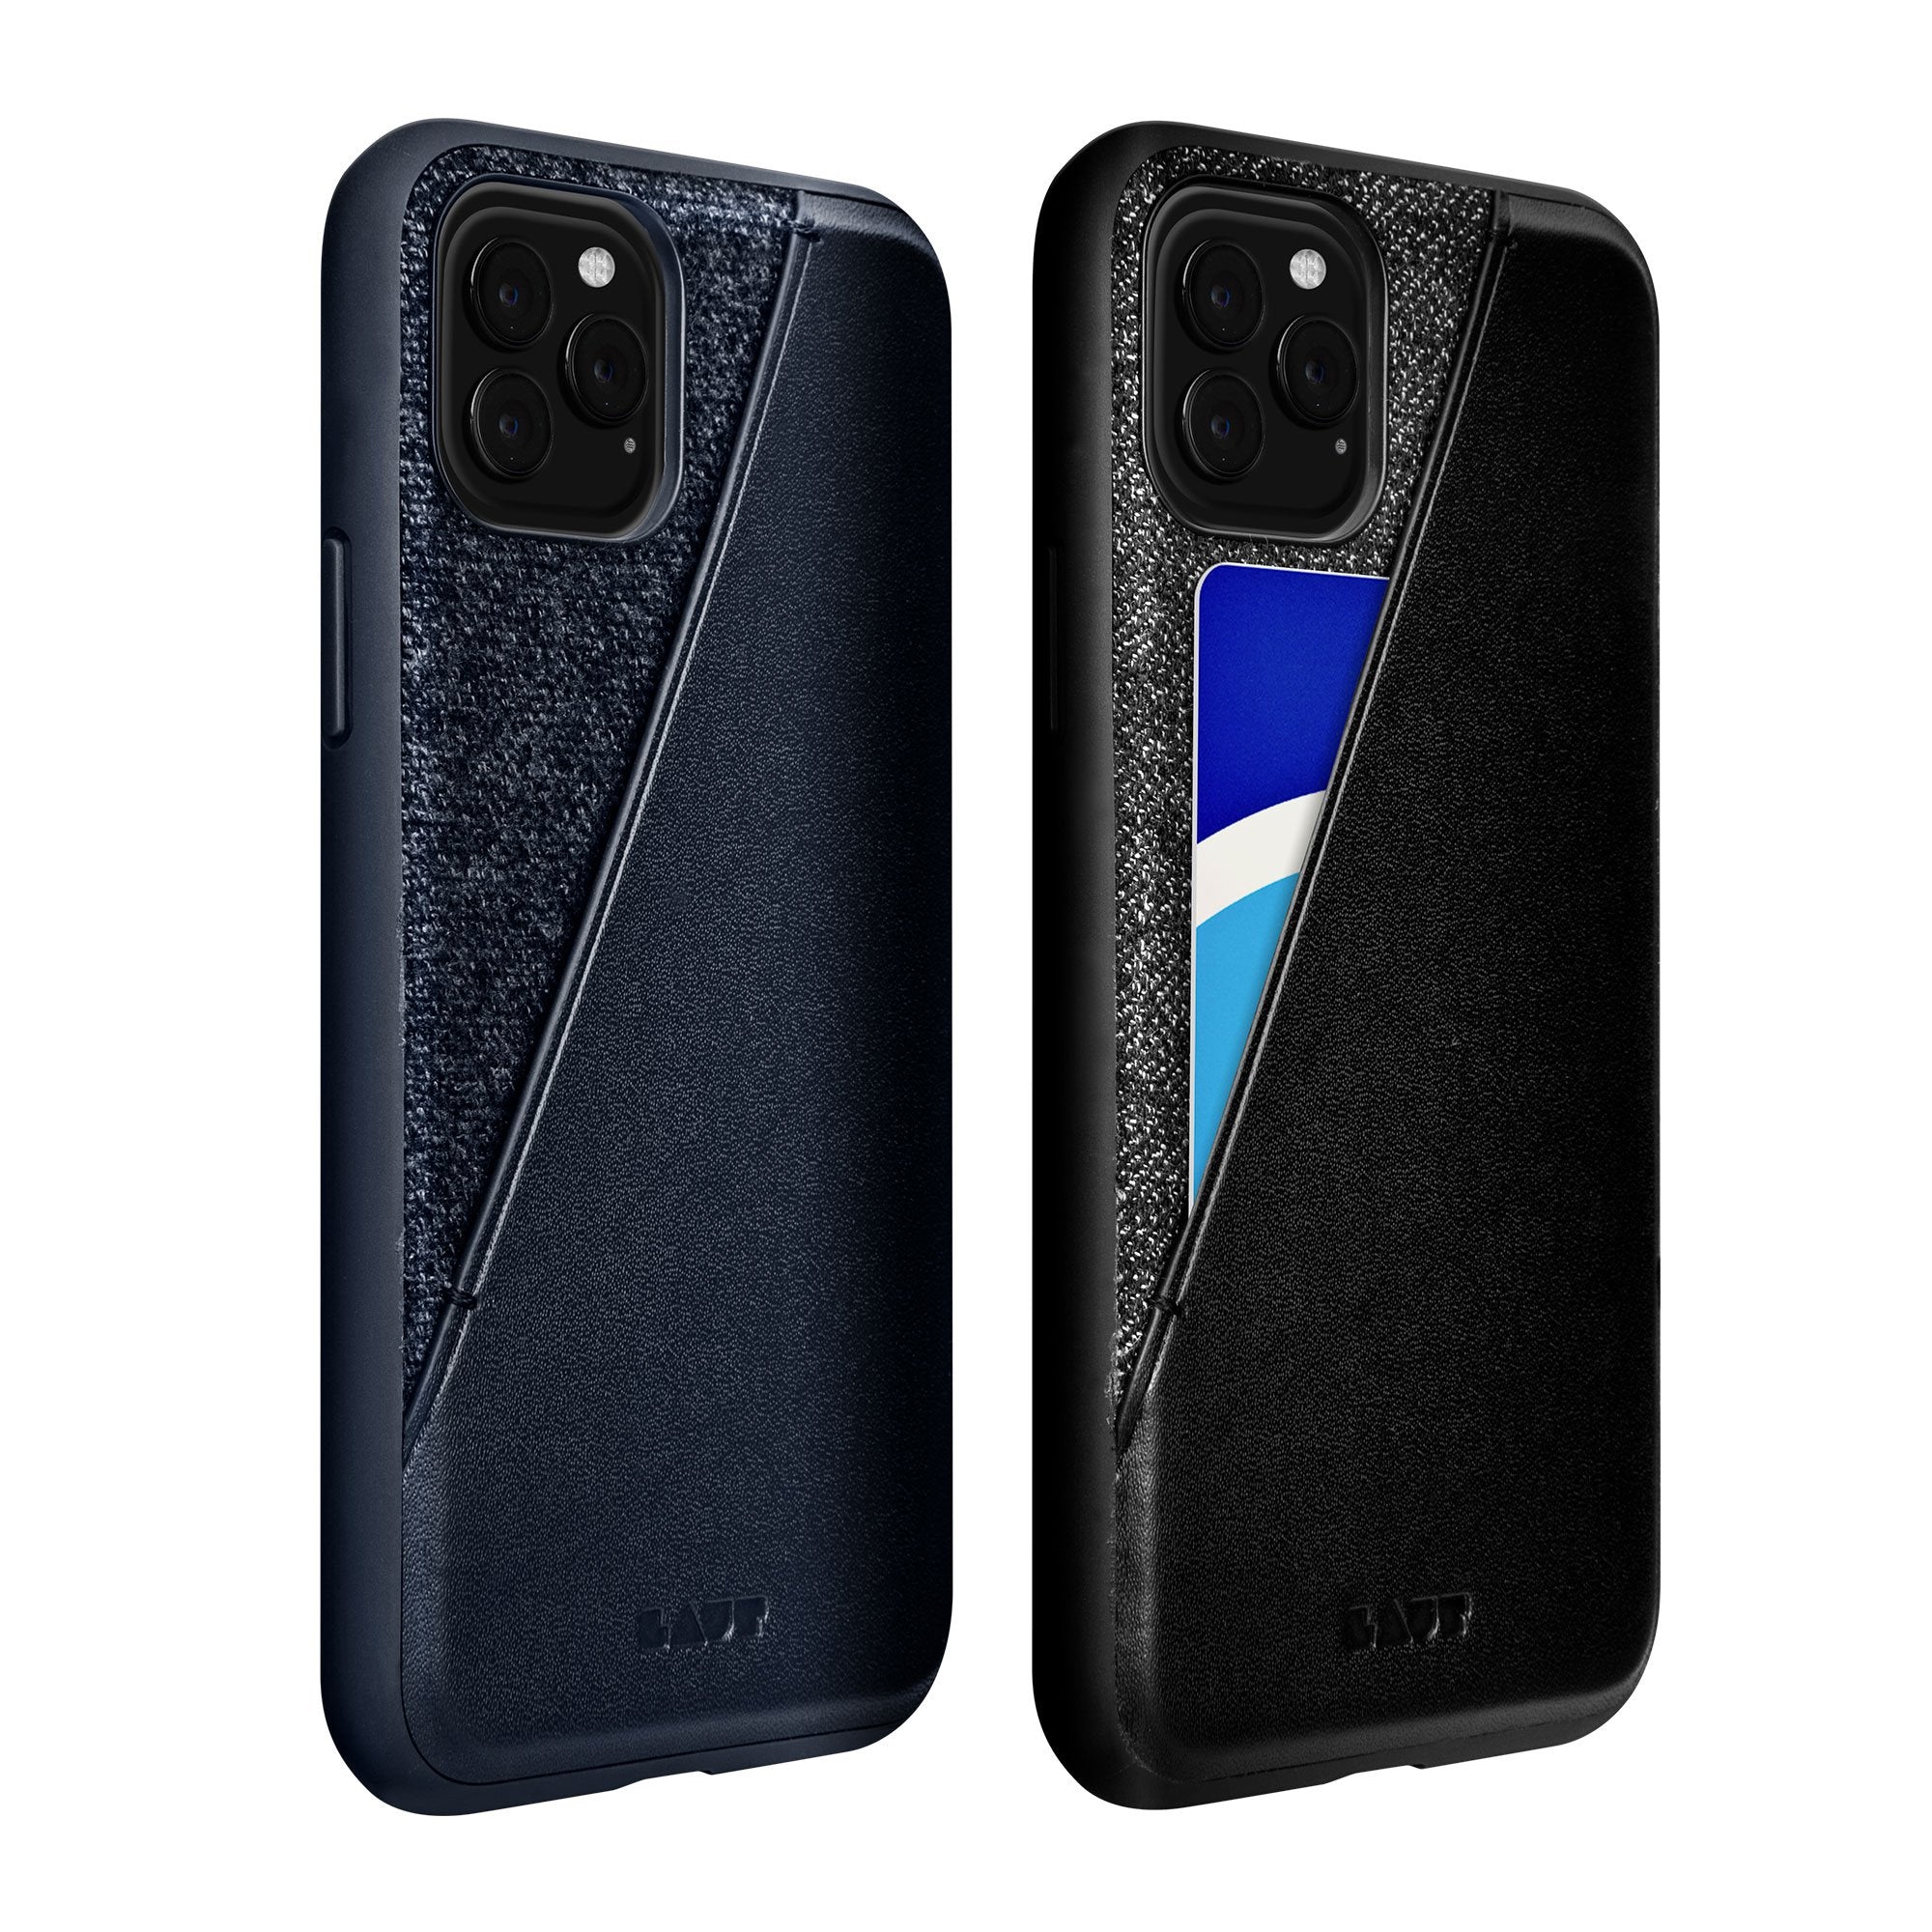 INFLIGHT CARD CASE for iPhone 11 Series - LAUT Japan